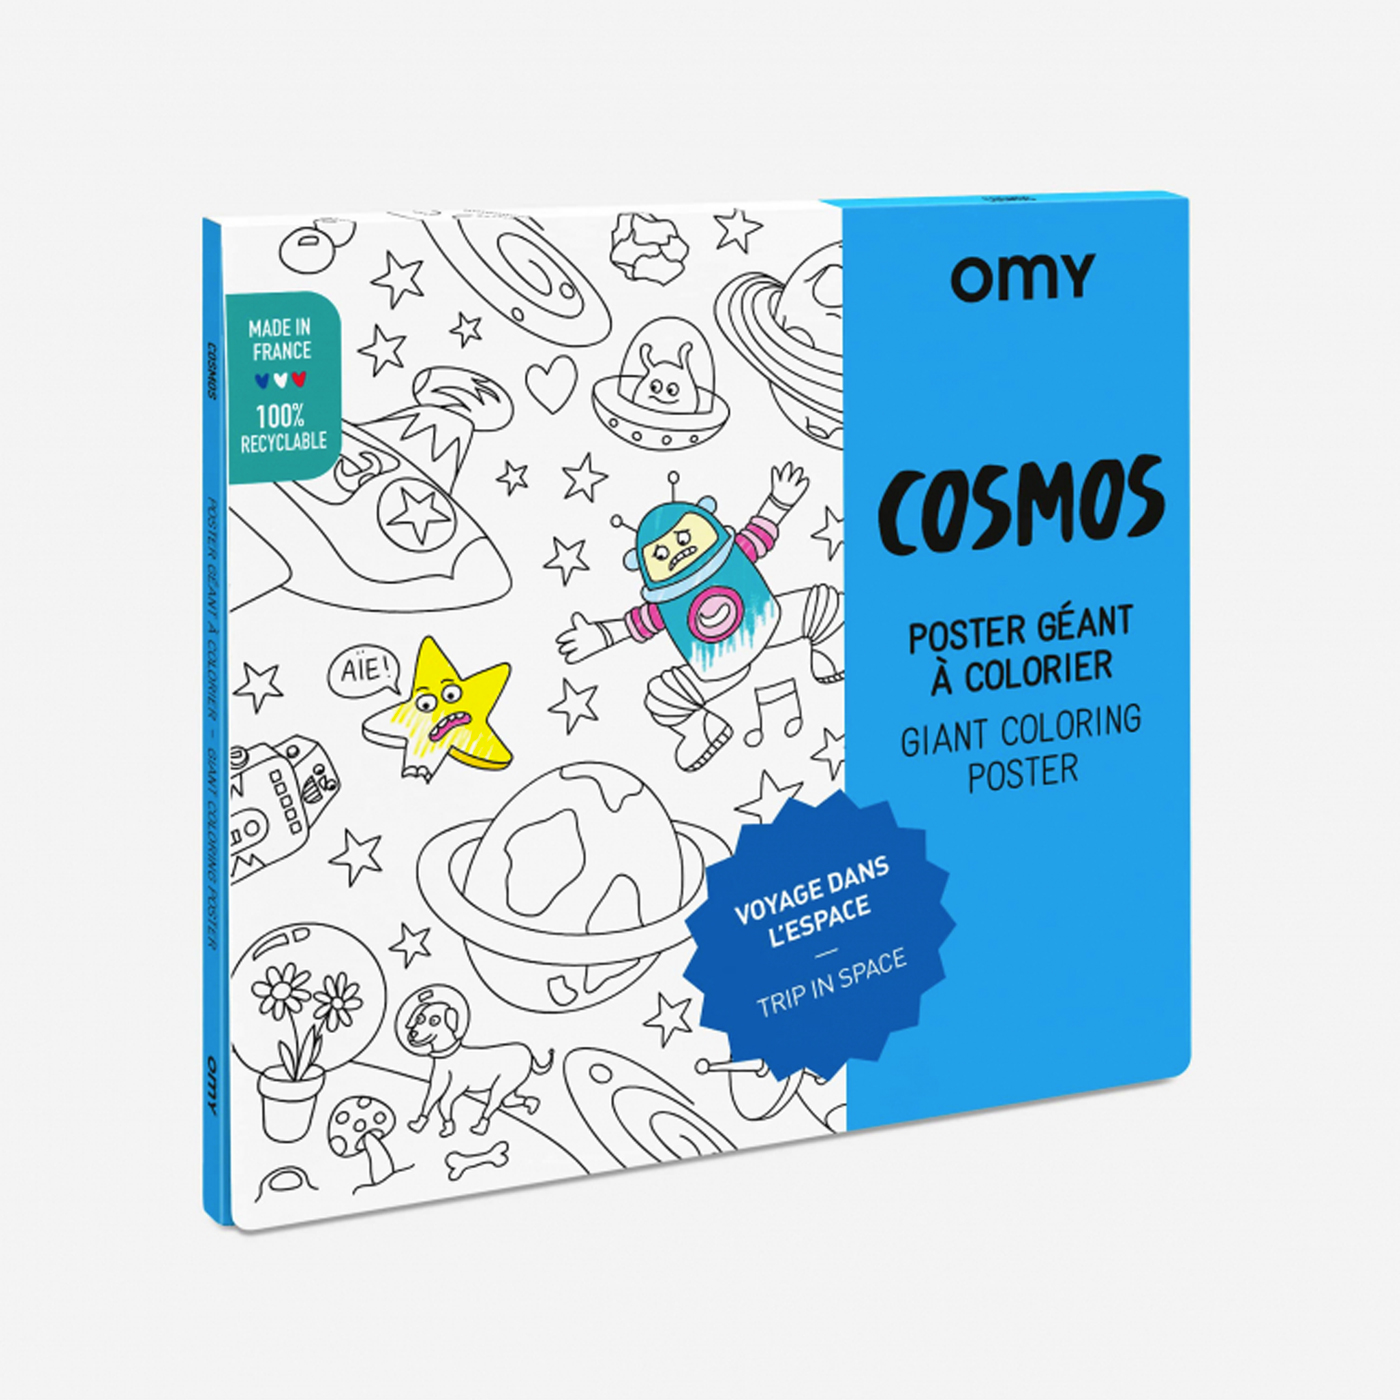 OMY Omy Coloring Poster  | Cosmos